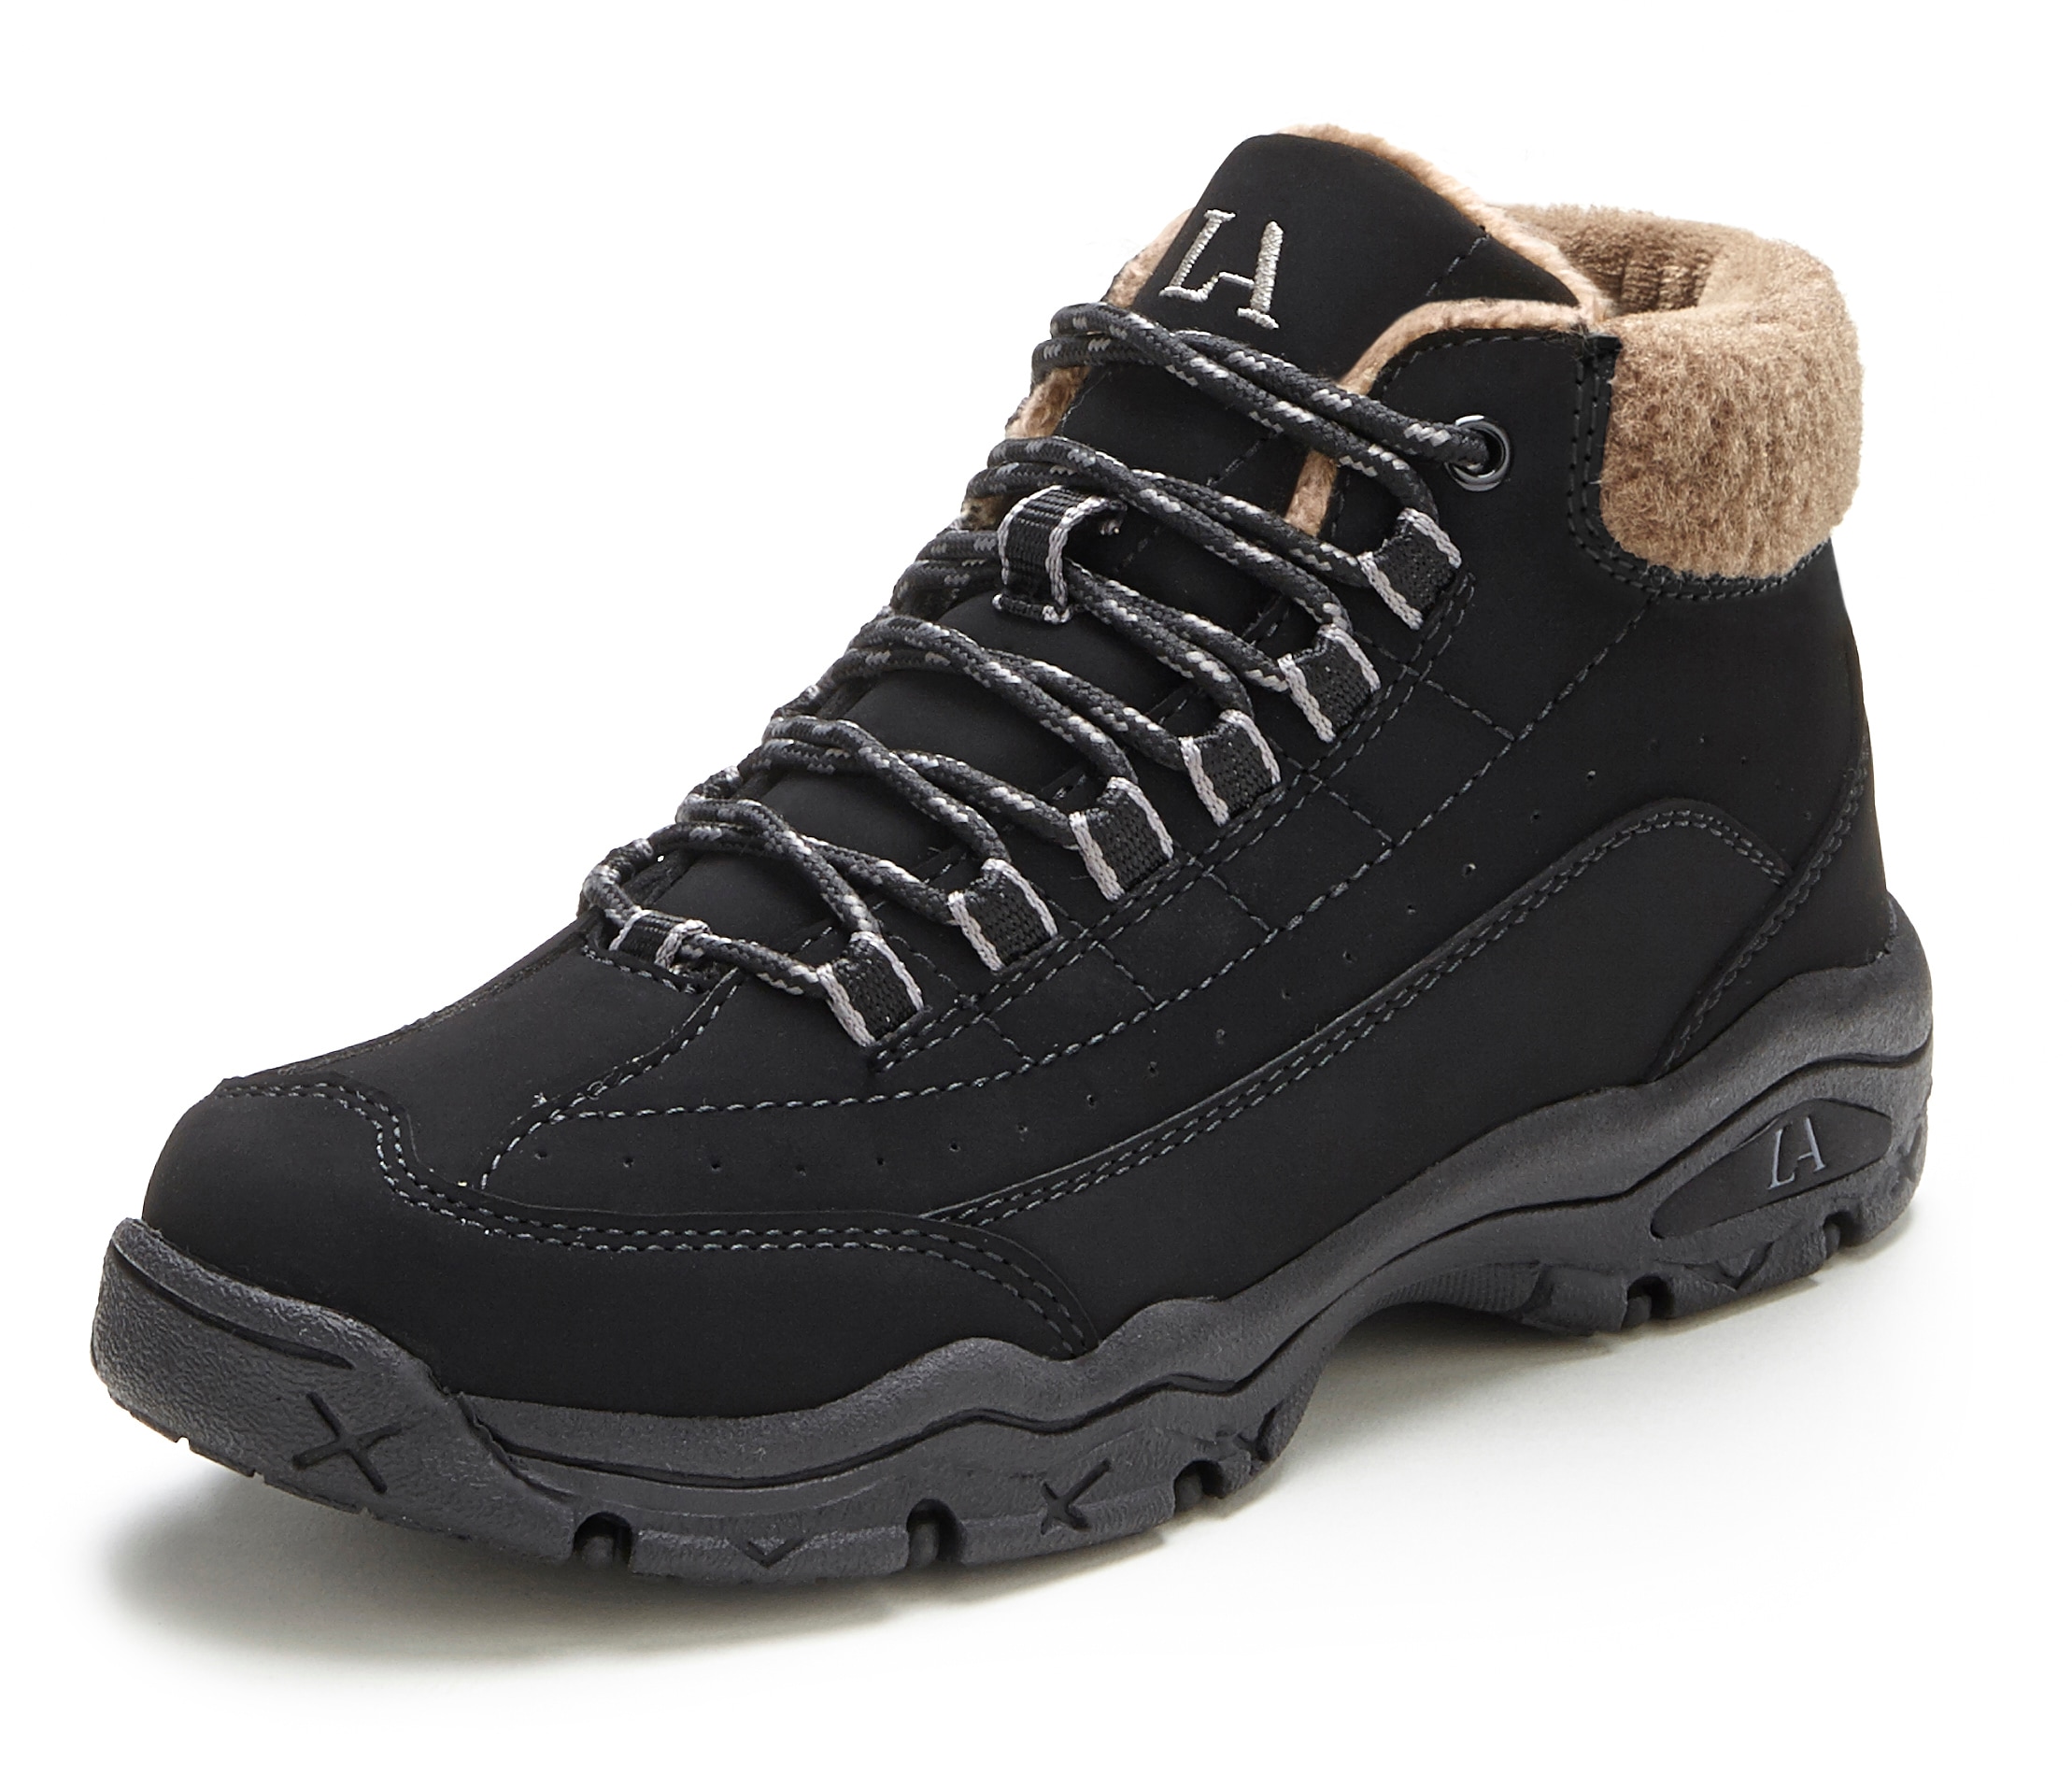 LASCANA Winterstiefelette, mit robuster Sohle, kuscheliges Warmfutter,Outdoor Boots,Ankle Sneaker